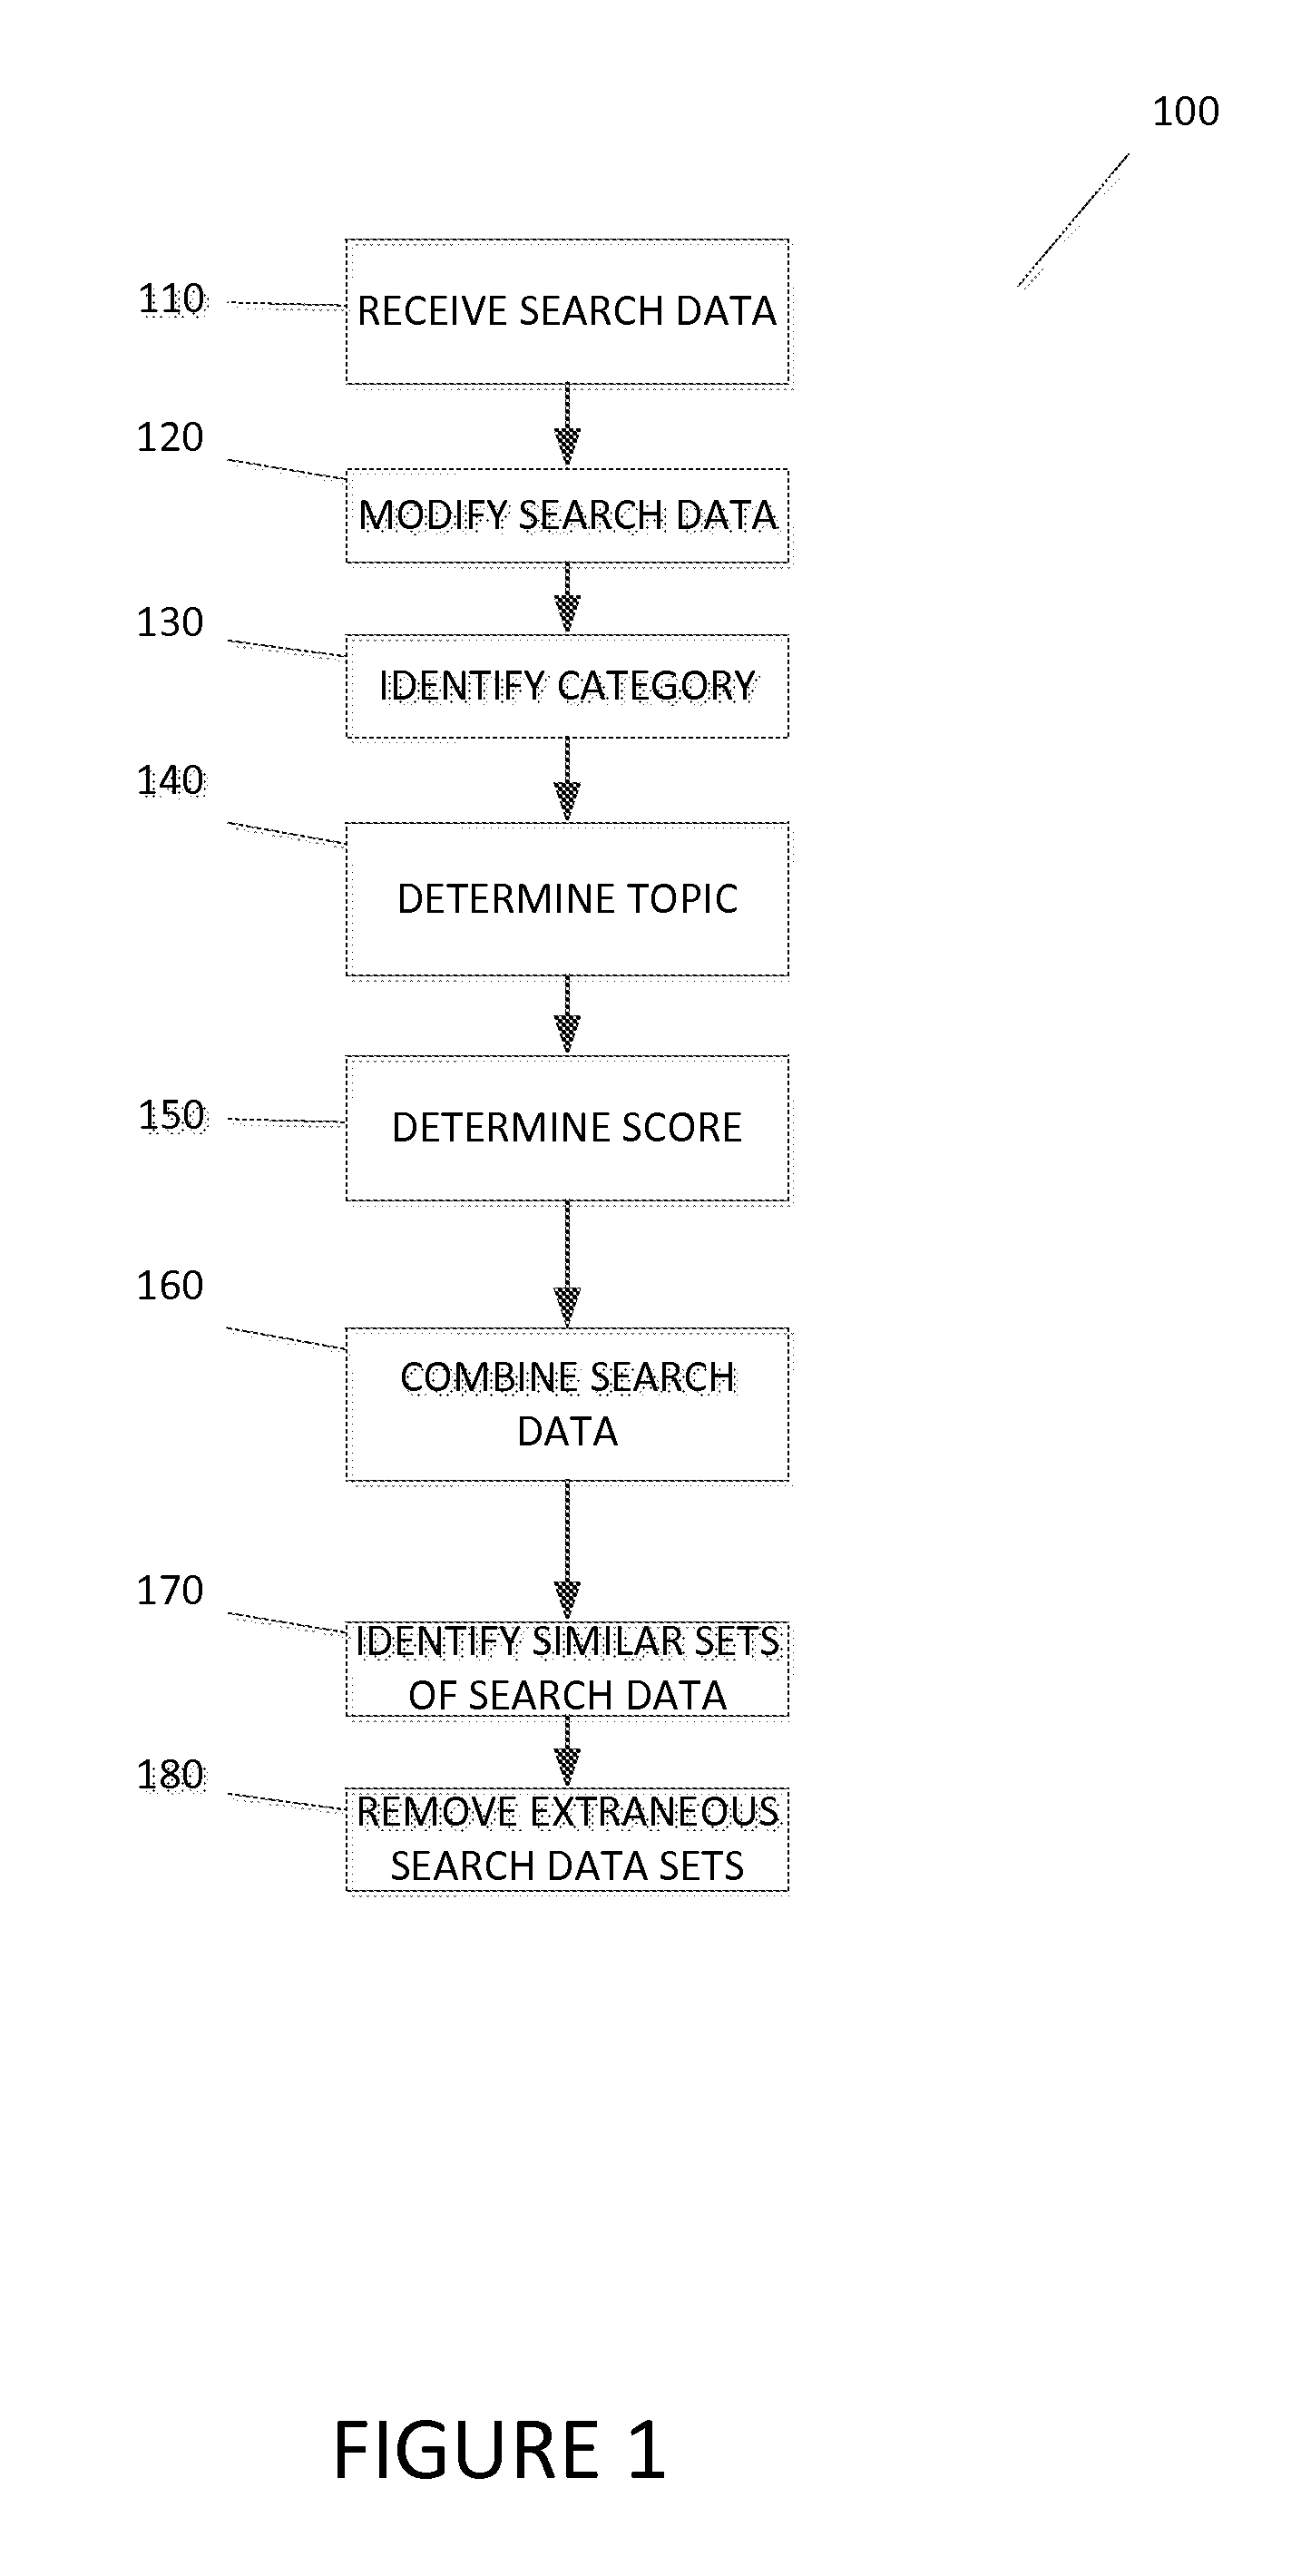 Systems and methods for determining content popularity based on searches